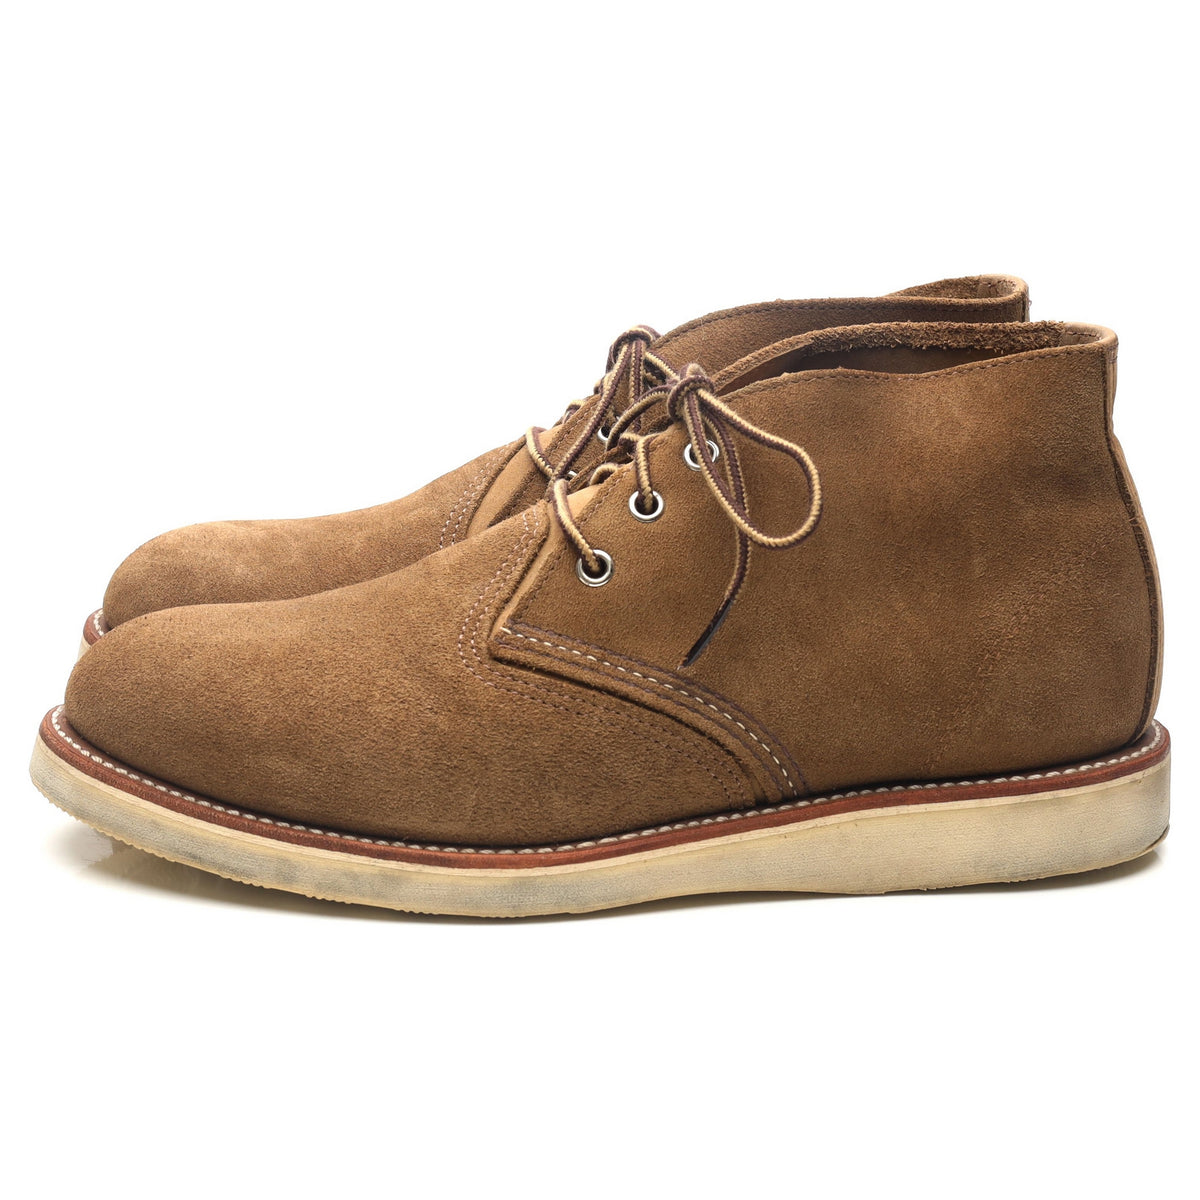 3149' Olive Brown Suede Chukka Boots UK 9 US 10 - Abbot's Shoes